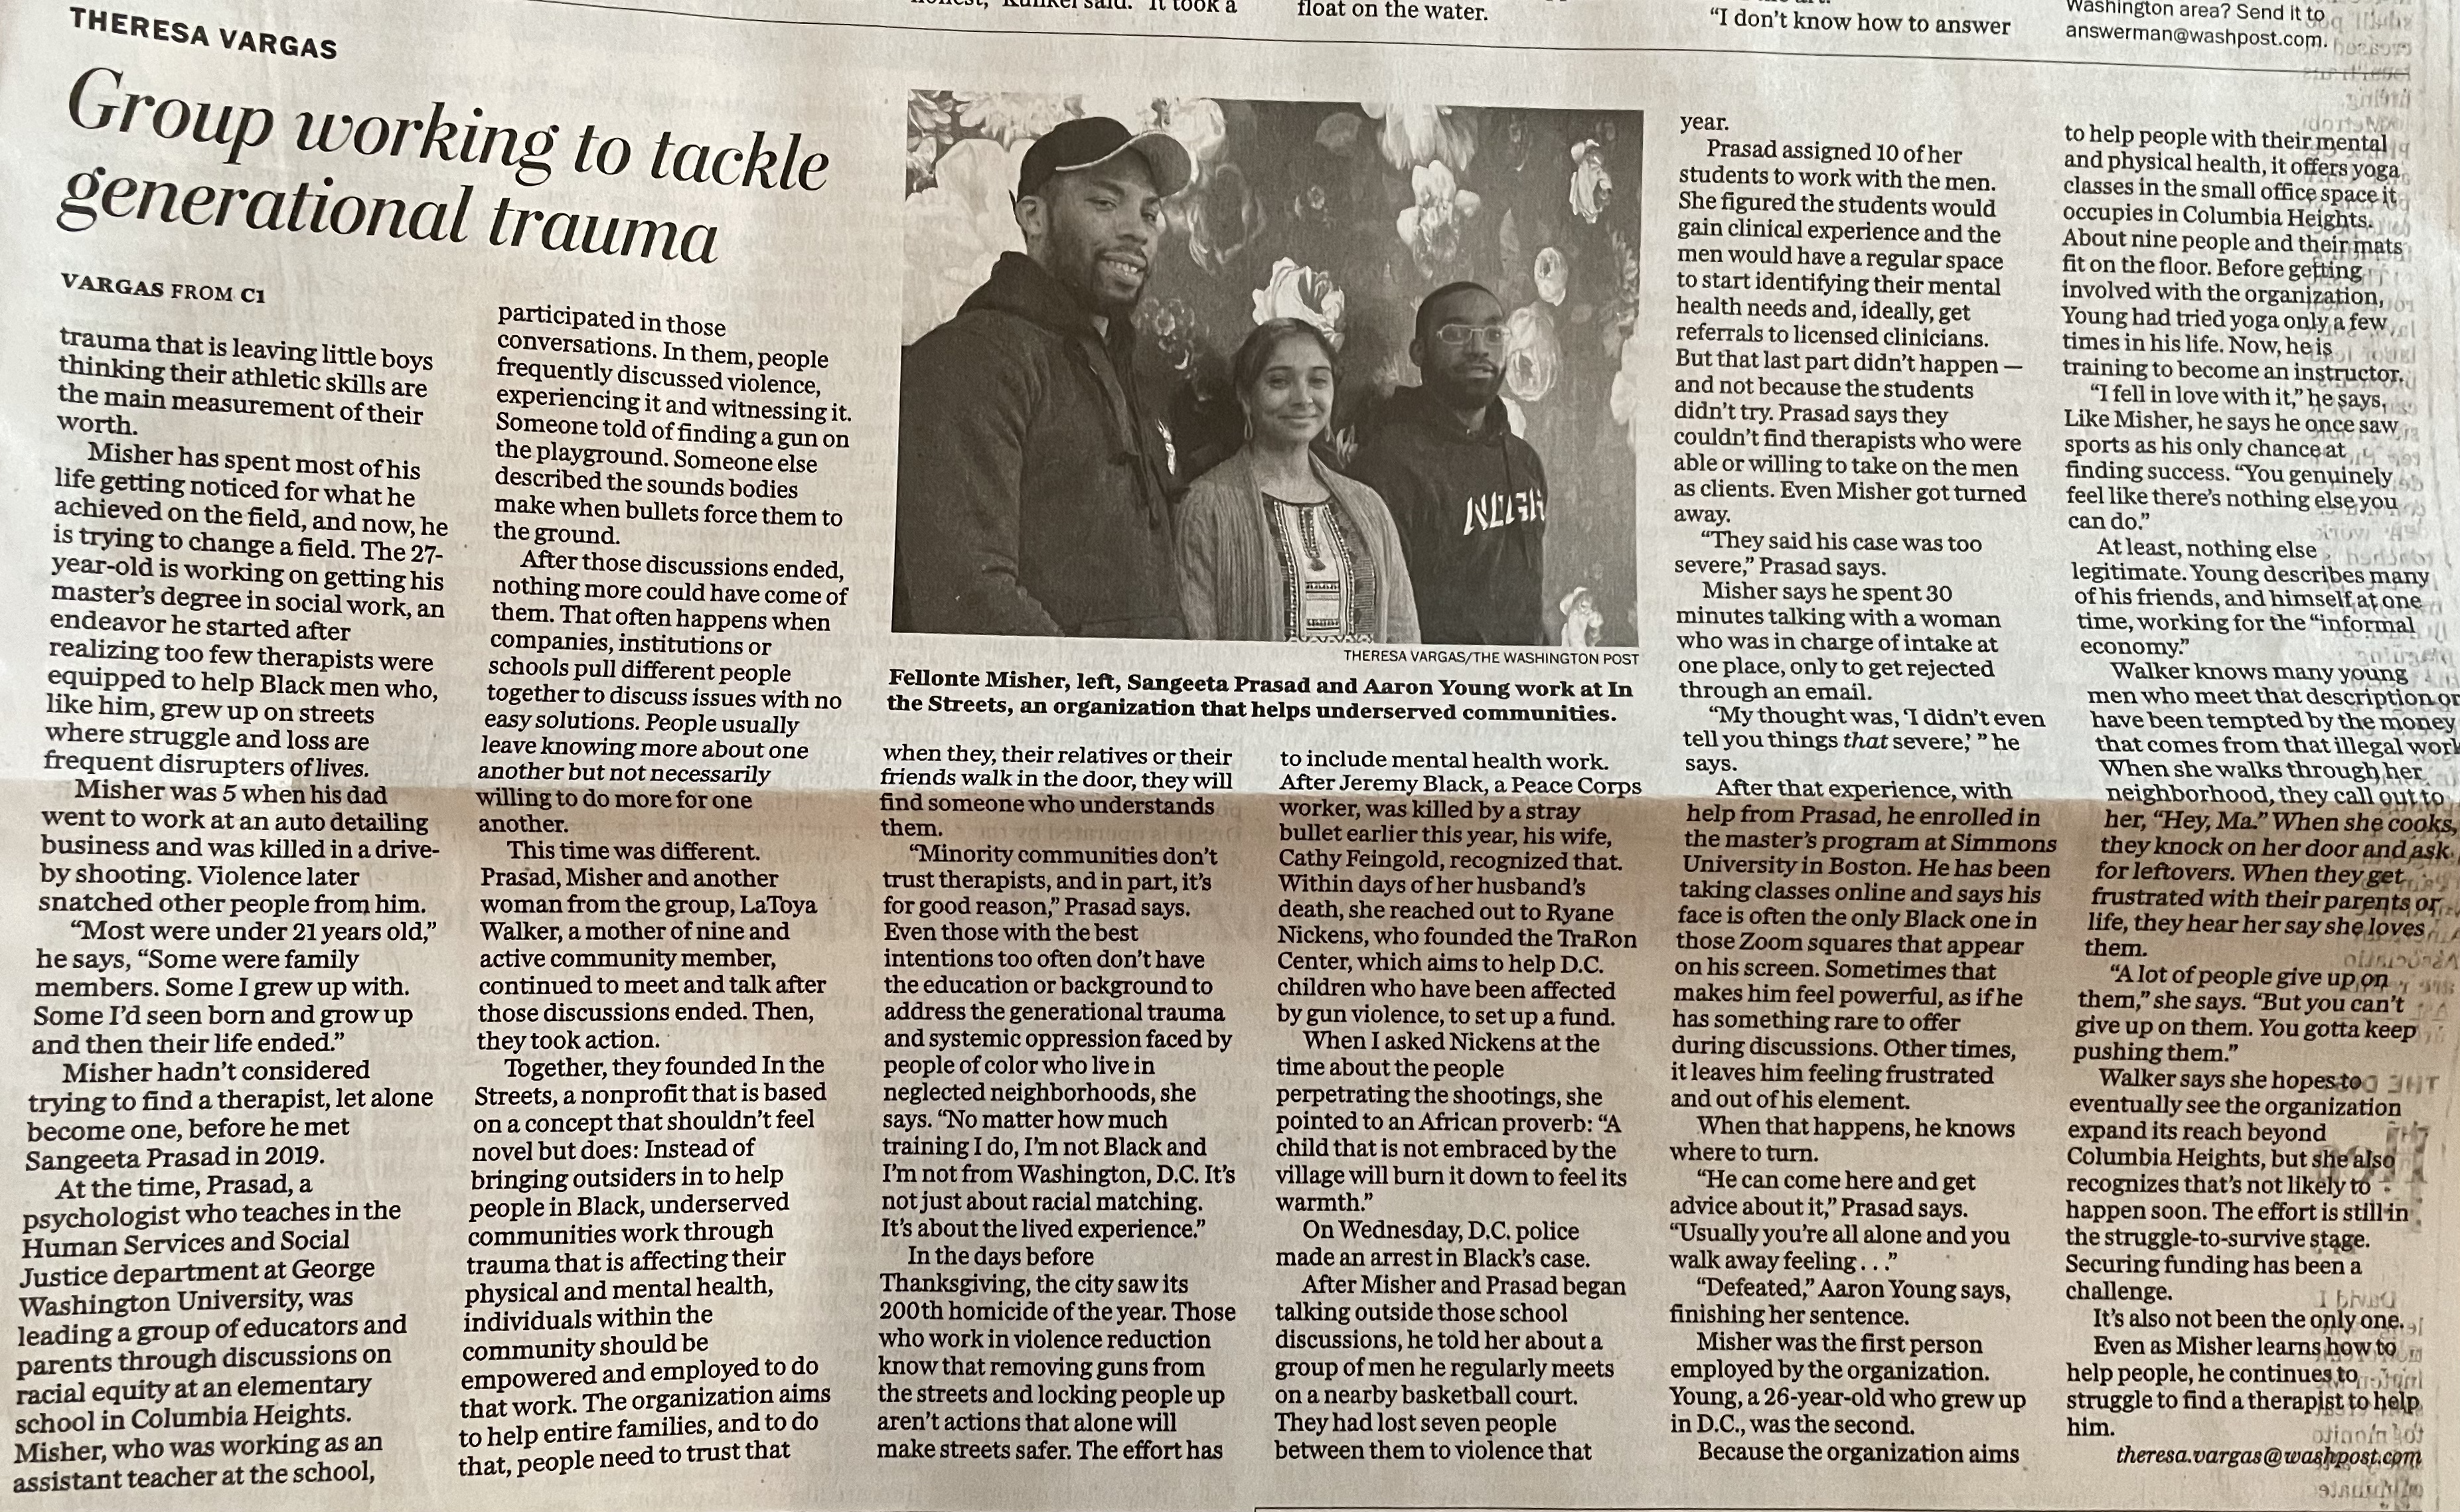 The Washington Post Article with an image of Fellonte Misher, Sangeeta Prasad, and Aaron Young